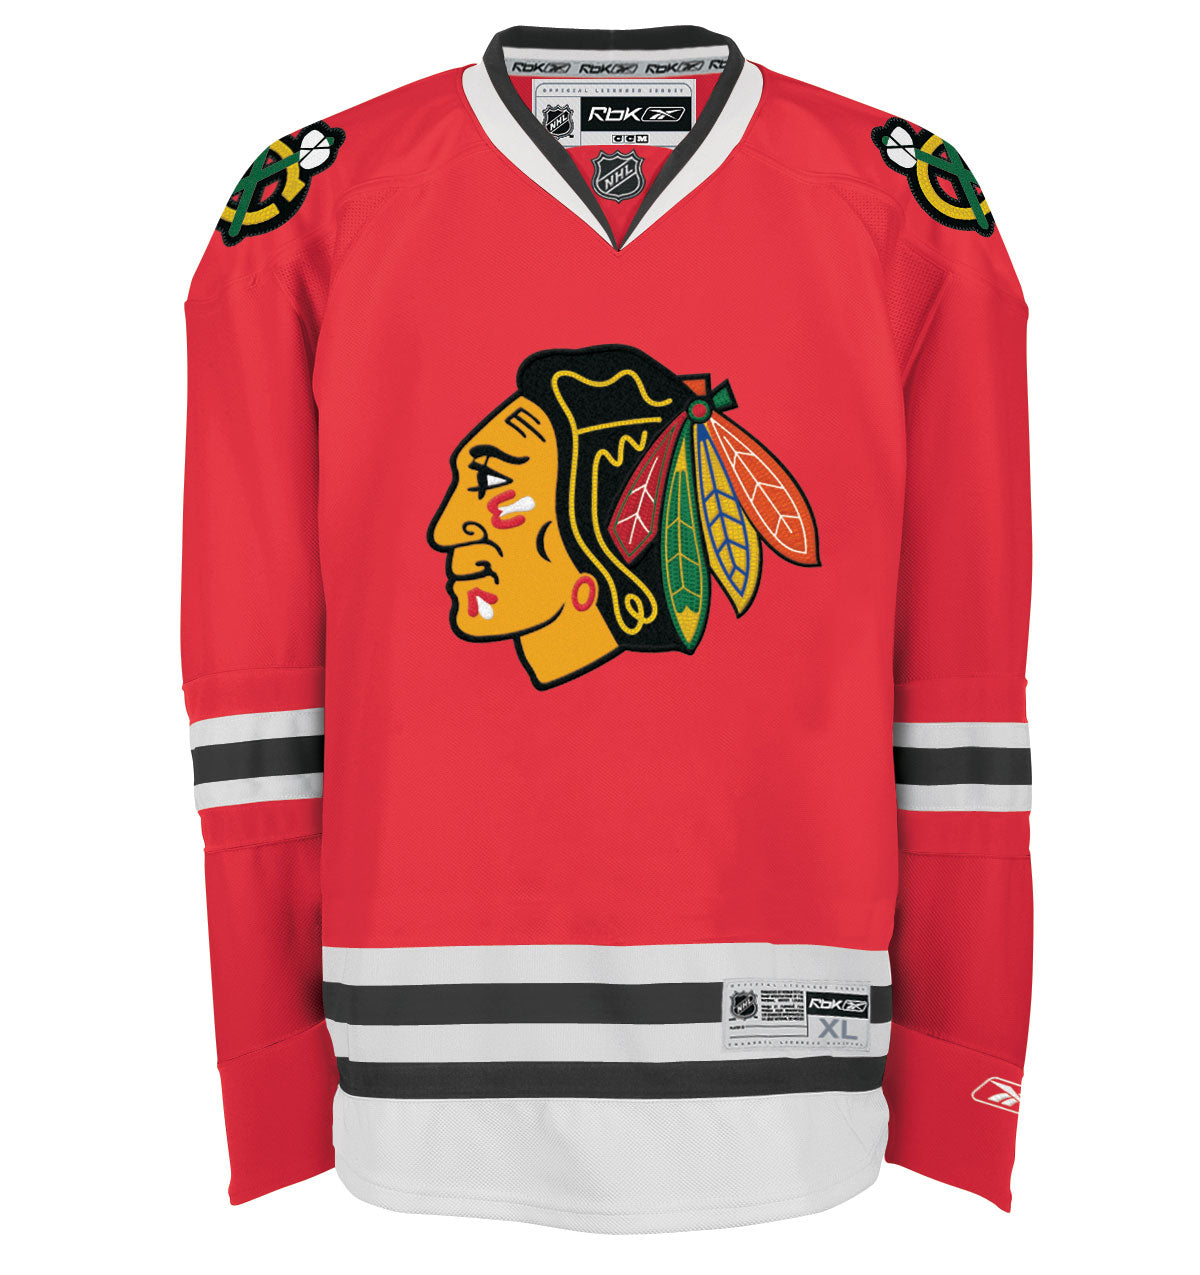 Chicago Blackhawks adidas Home Authentic Custom Jersey - Red